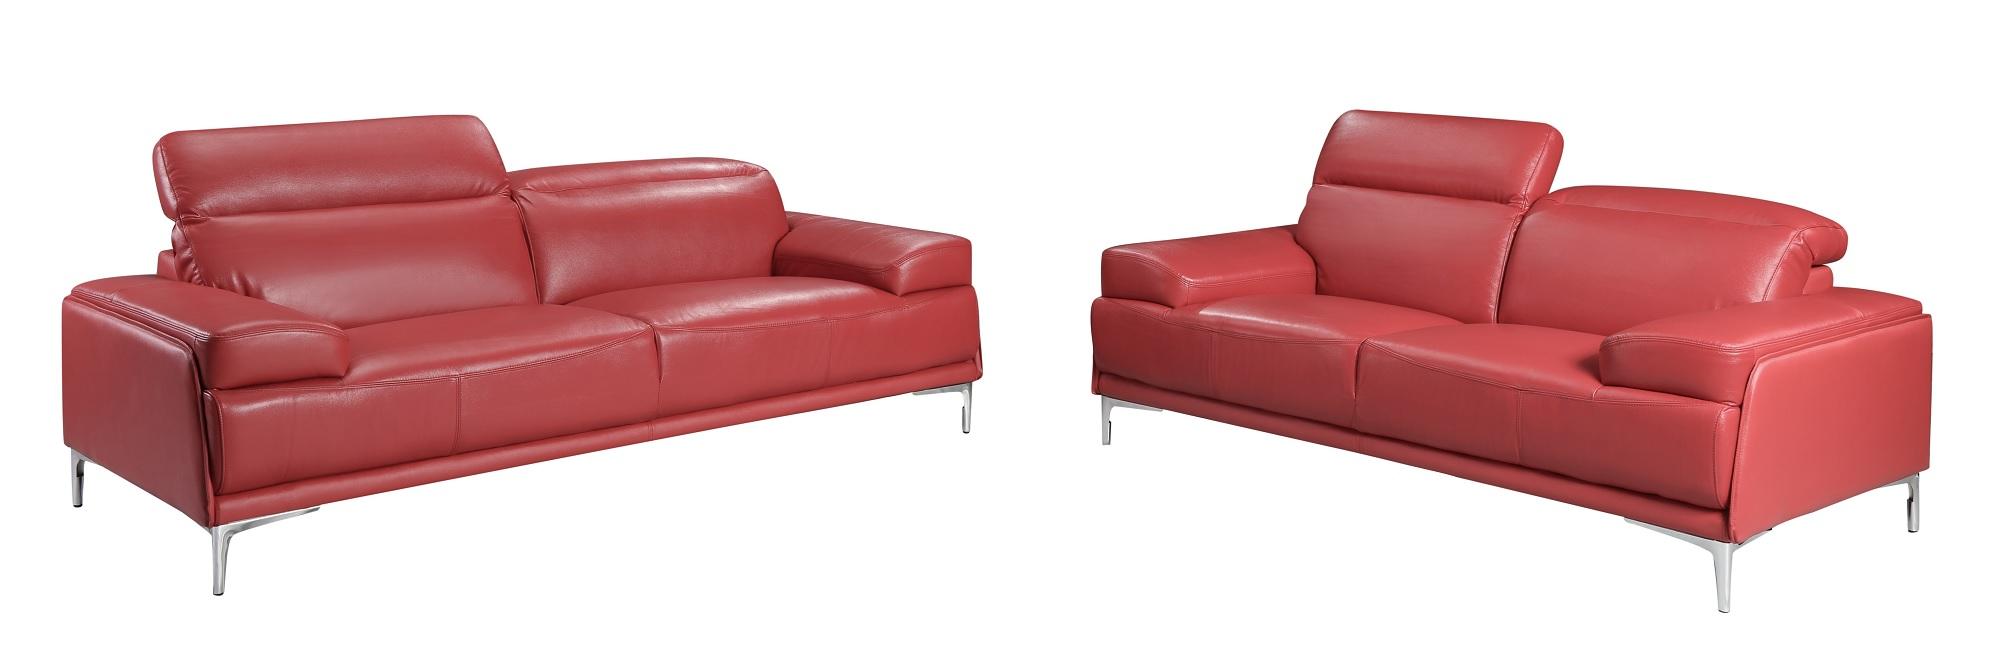 Modern Sofa and Loveseat Set Nicolo SKU 18981-Set-2 in Red Leather